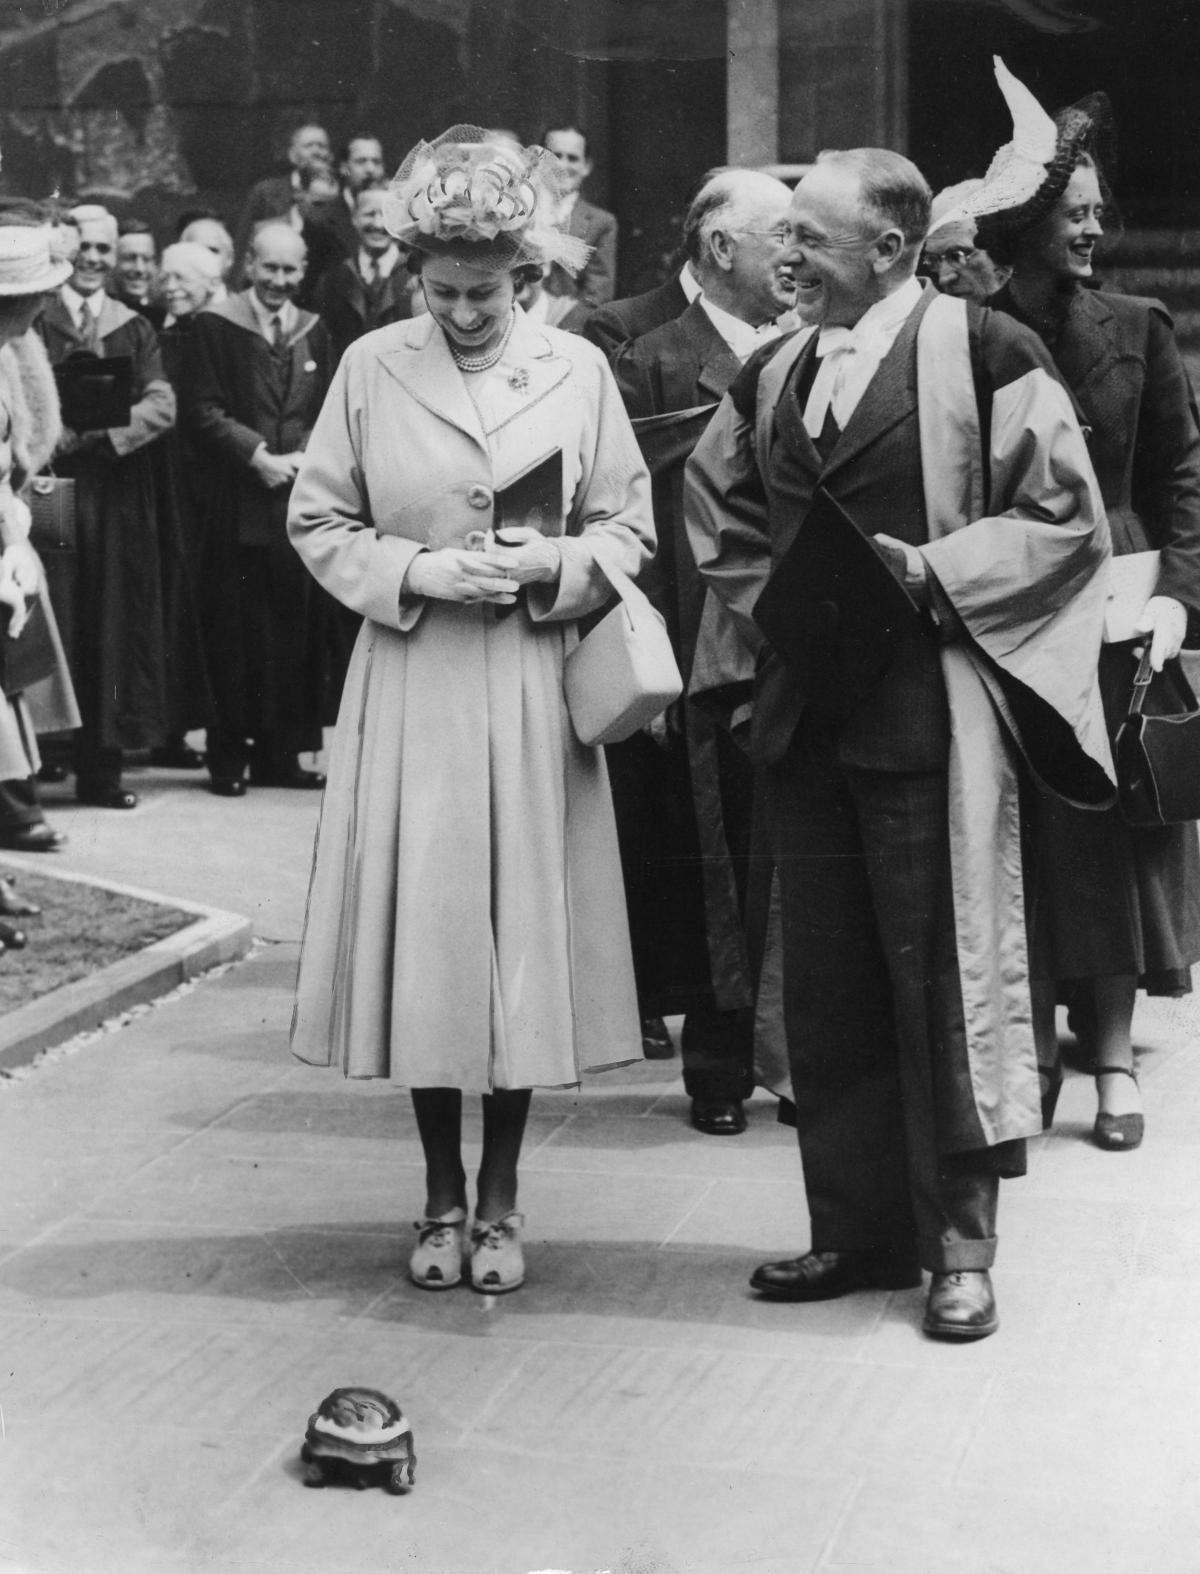 The Queen ­- then Princess Elizabeth - during her first official Oxford visit in 1948. It became a funny affair when she was greeted by Mr Testudo, the famous tortoise of Oriel College, who slowly made his way to the princess across the college quad.